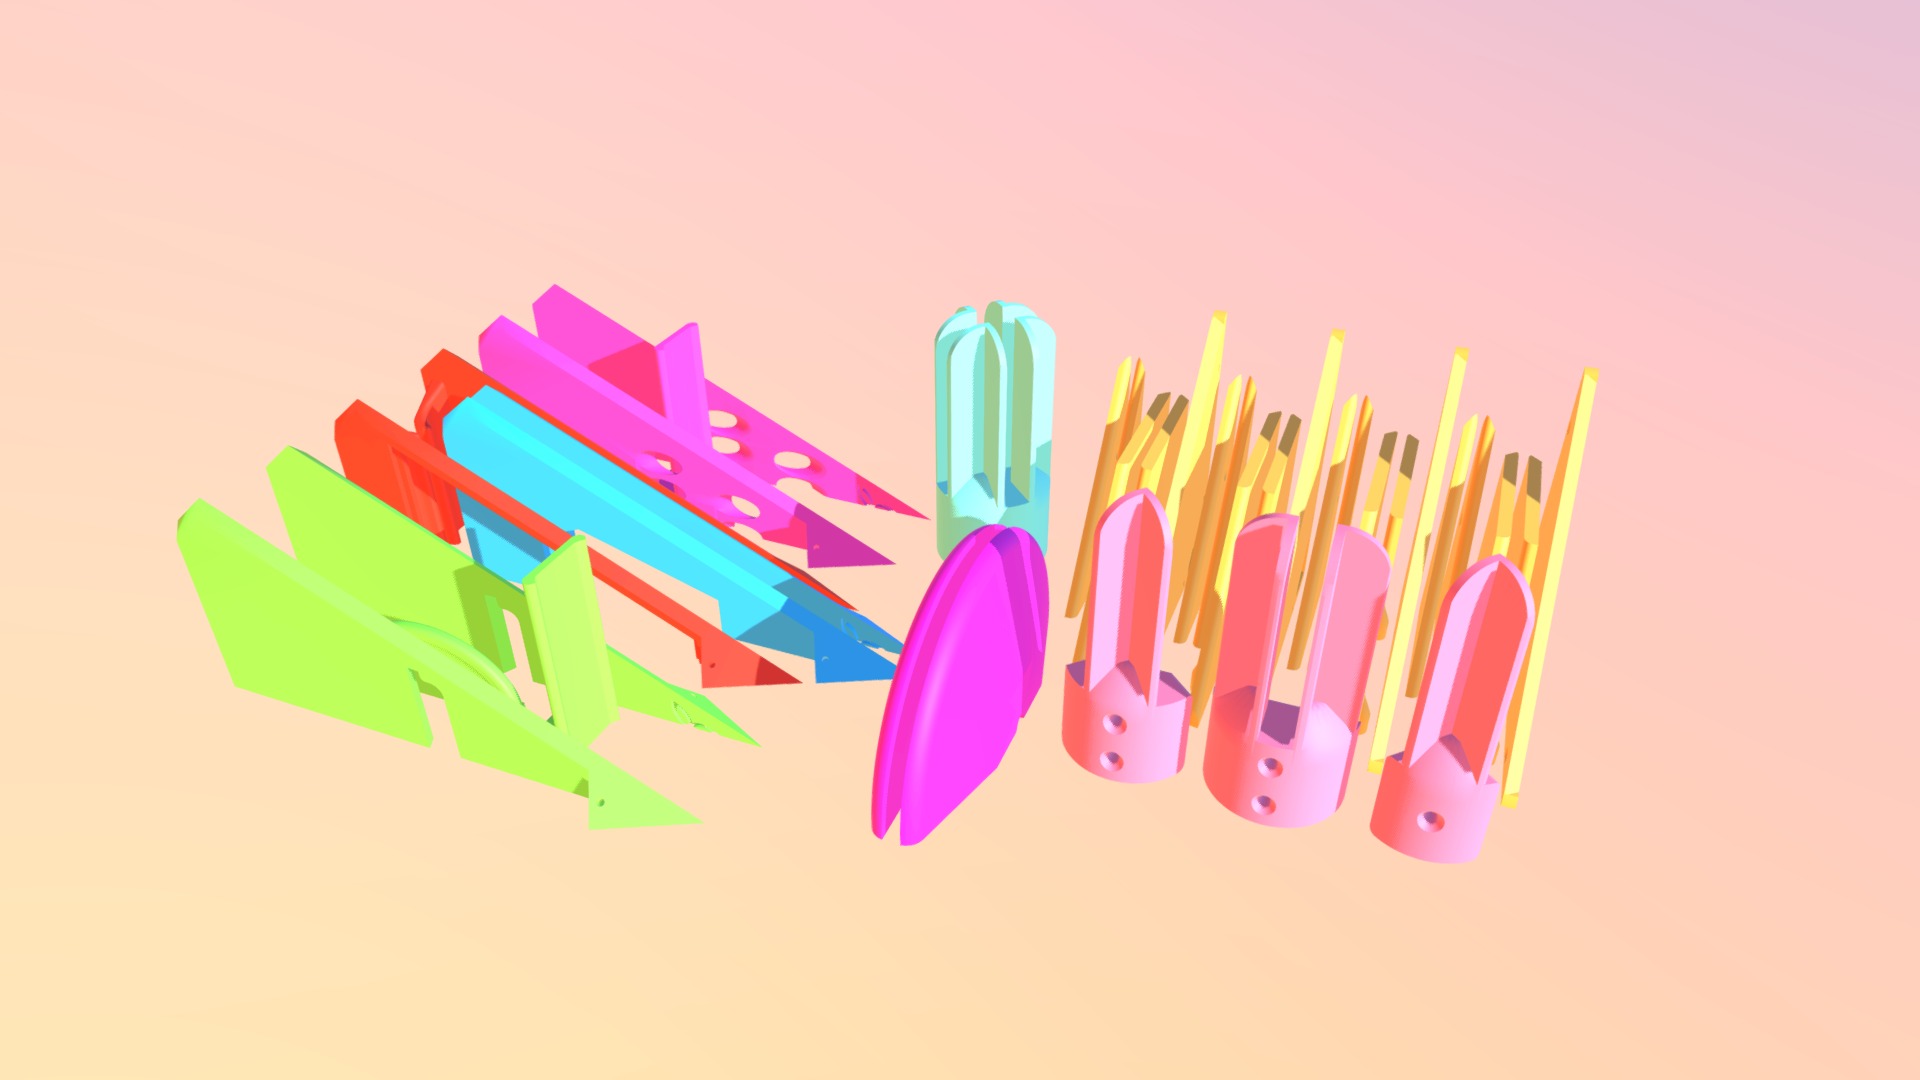 3D model Prism P7 – Complete Prism P7 Package - This is a 3D model of the Prism P7 - Complete Prism P7 Package. The 3D model is about a group of colorful scissors.